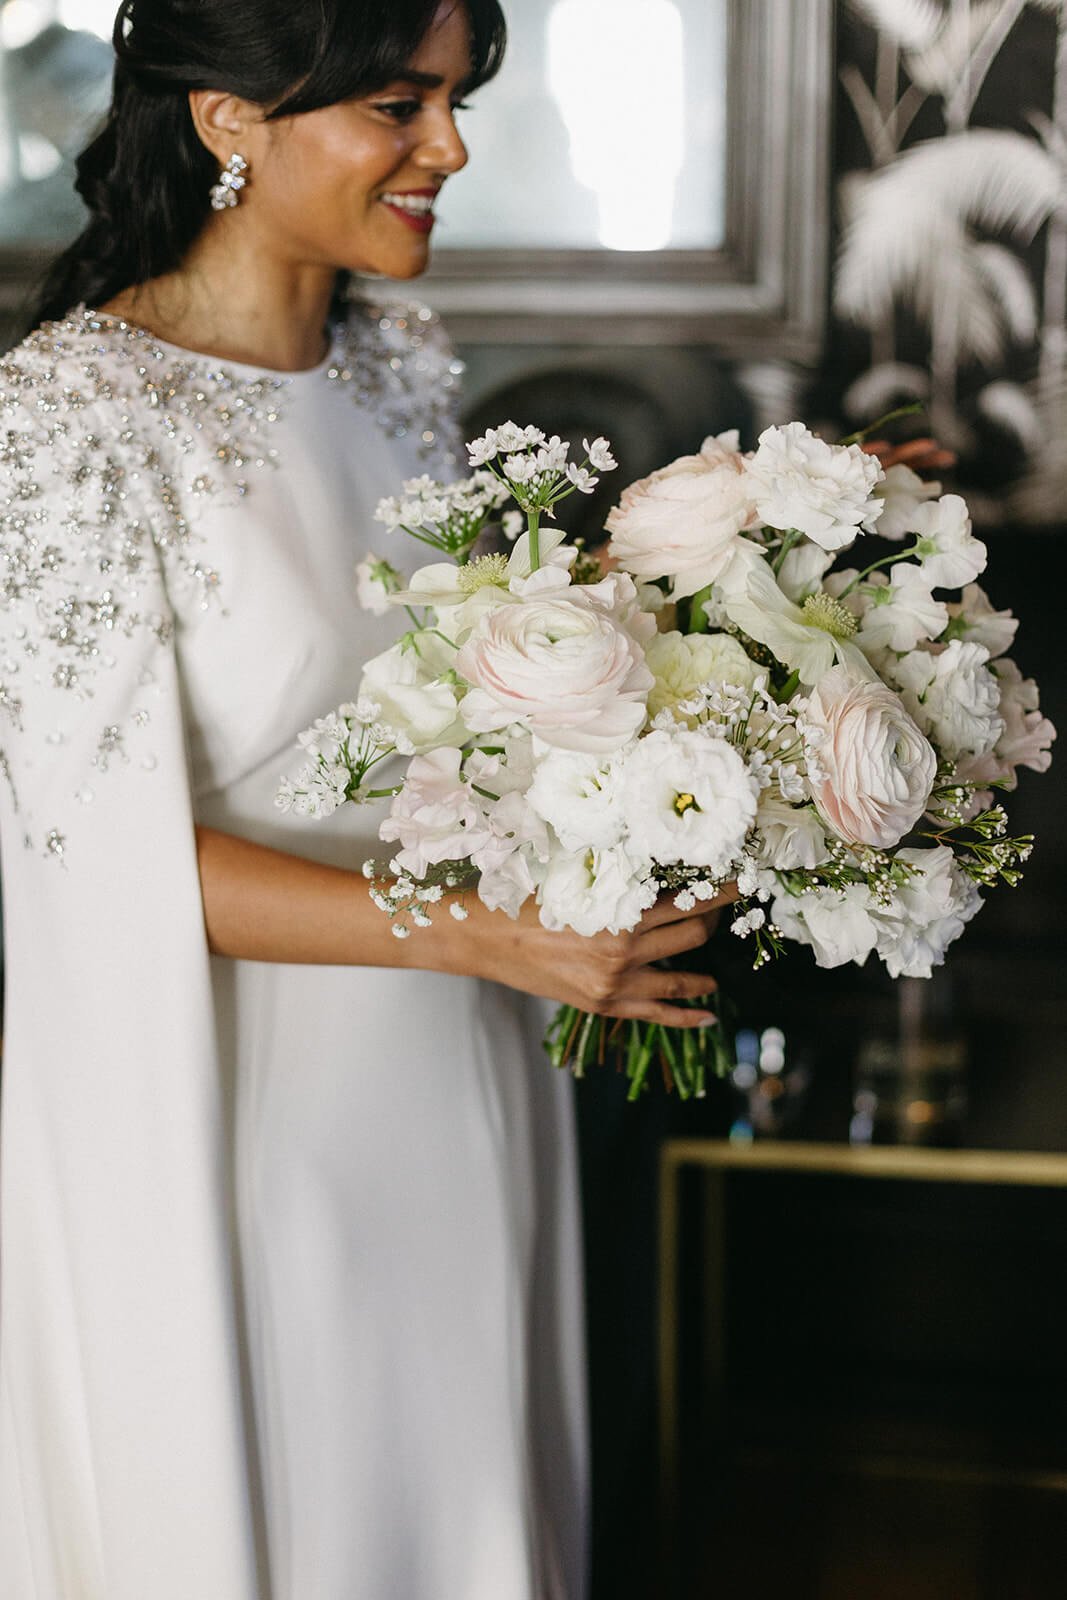 Bride in a beautifully detailed gown holding a lush bouquet, ready to walk down the aisle.